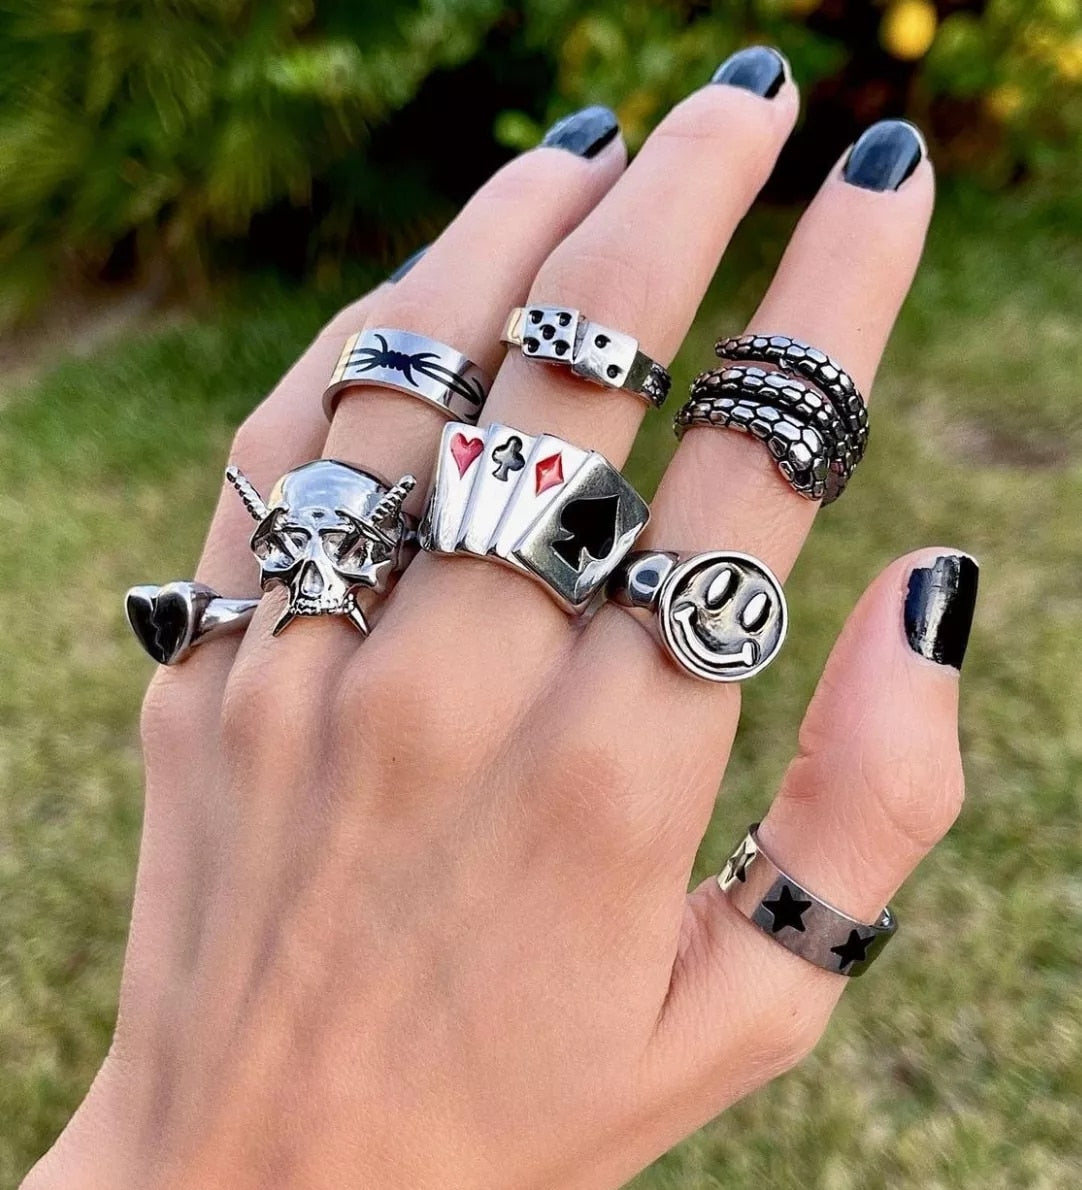 Vg 6ym New Fashion Silver Black Angel Baby  Ring For Women Skeleton Female Set Ring For Women Jewelry Dropshipping Gifts